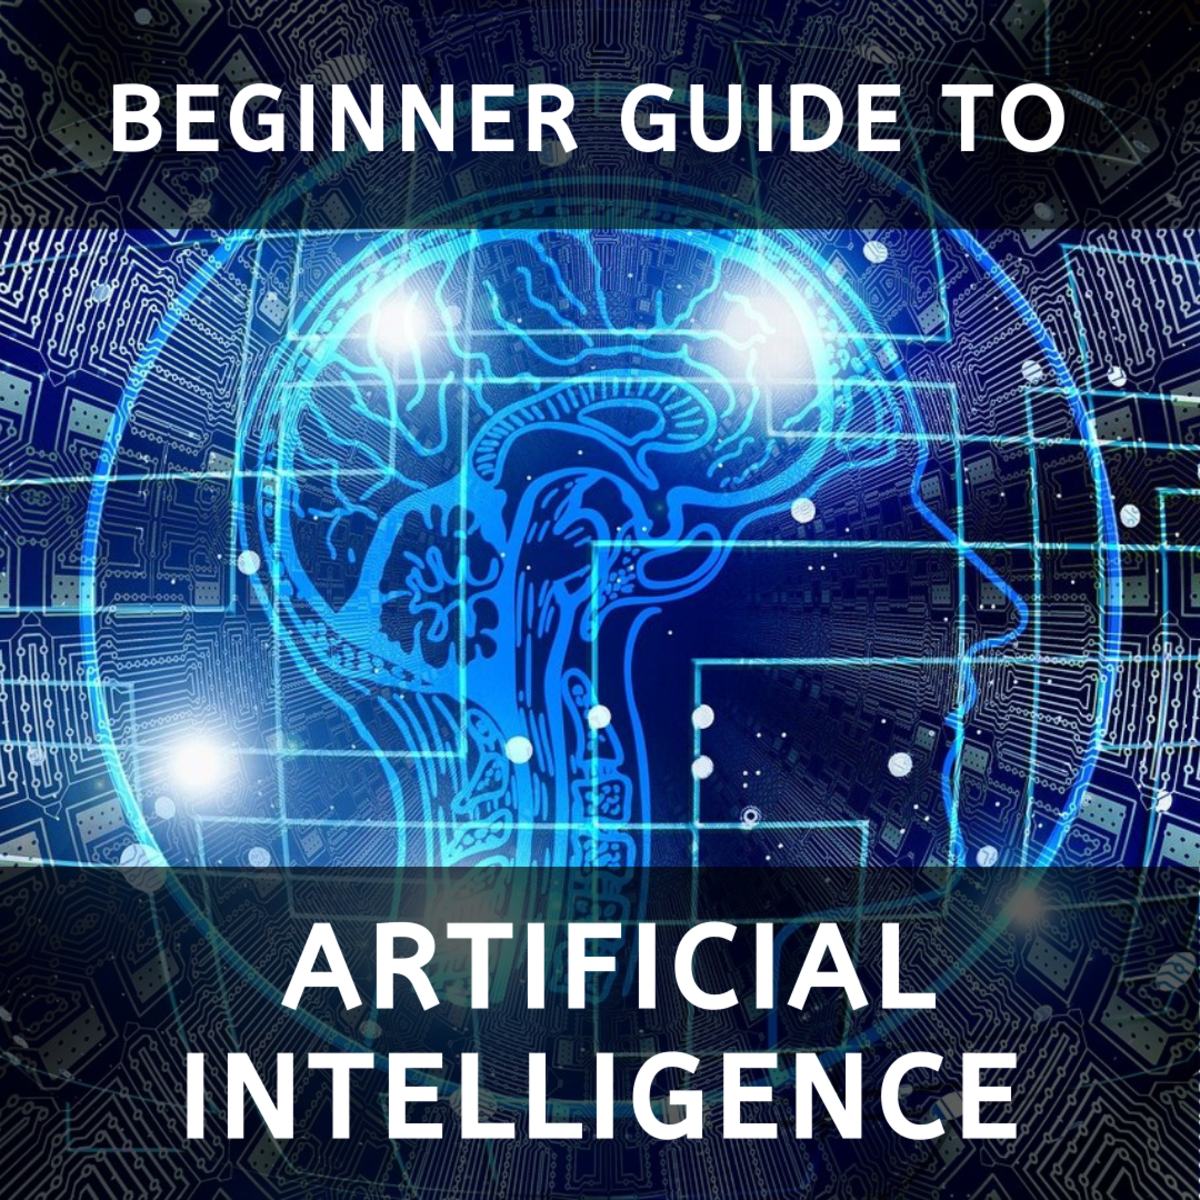 A Beginner-Friendly Guide to Artificial Intelligence